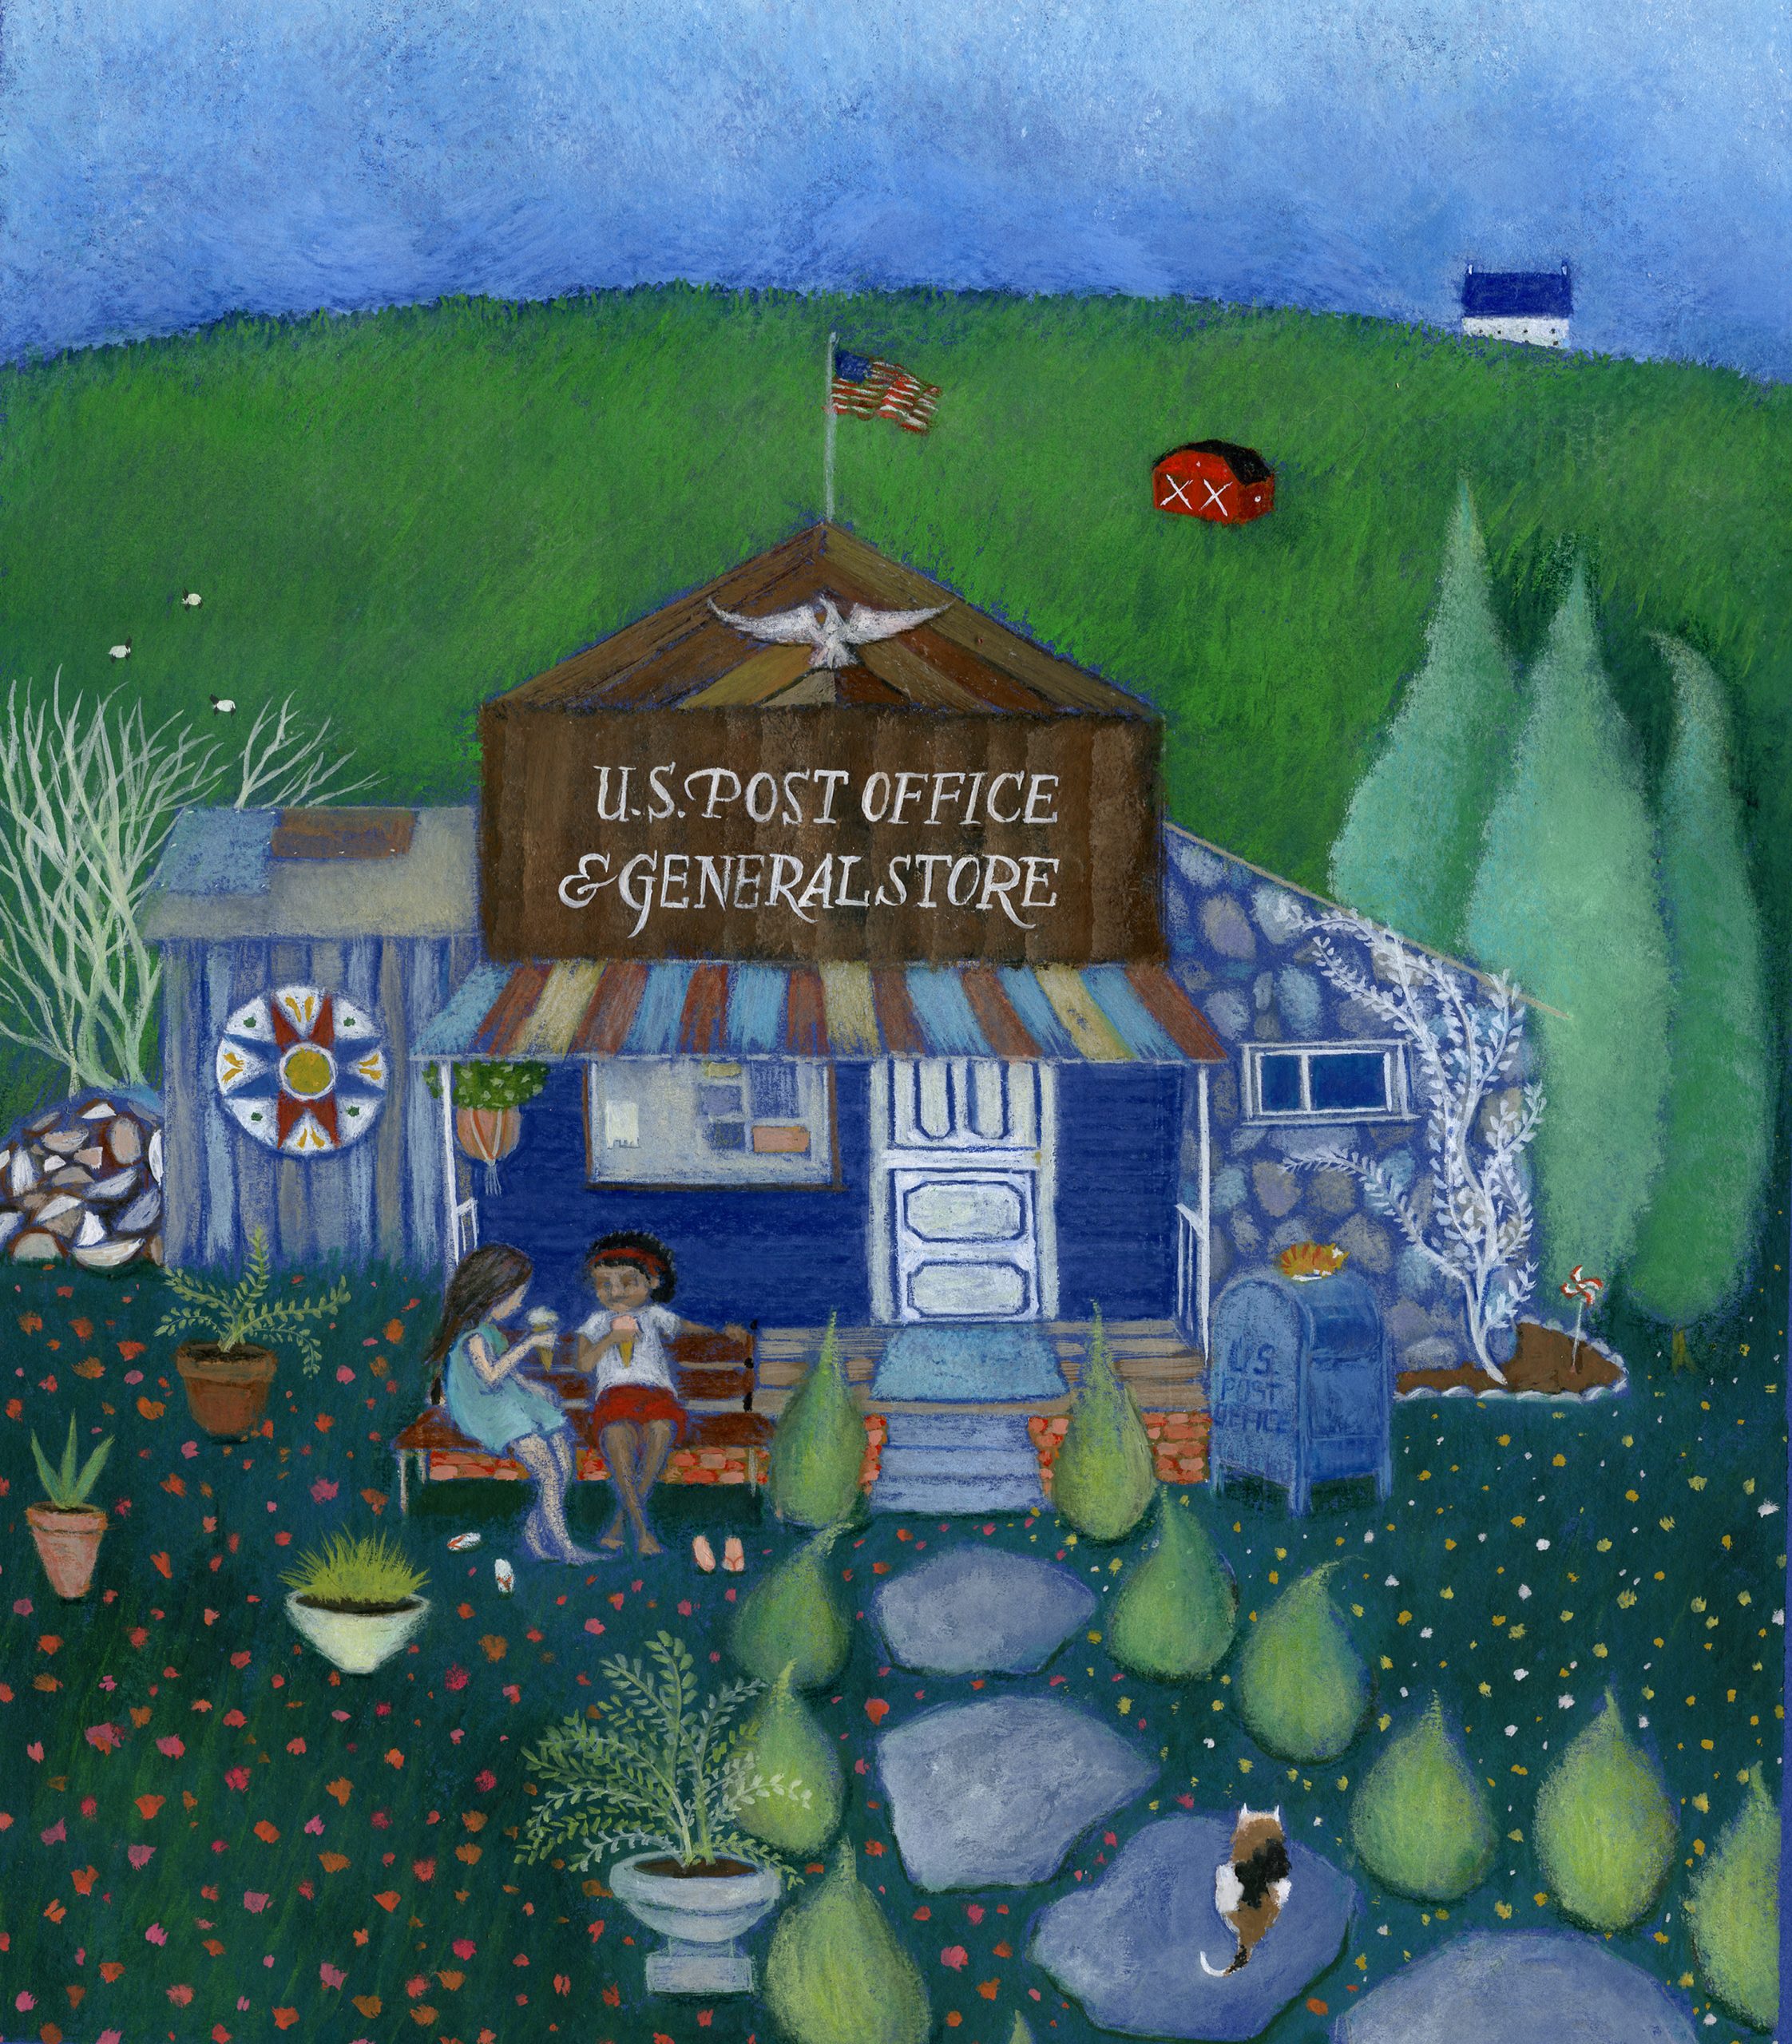 hand drawing of U.S. Post Office and General store